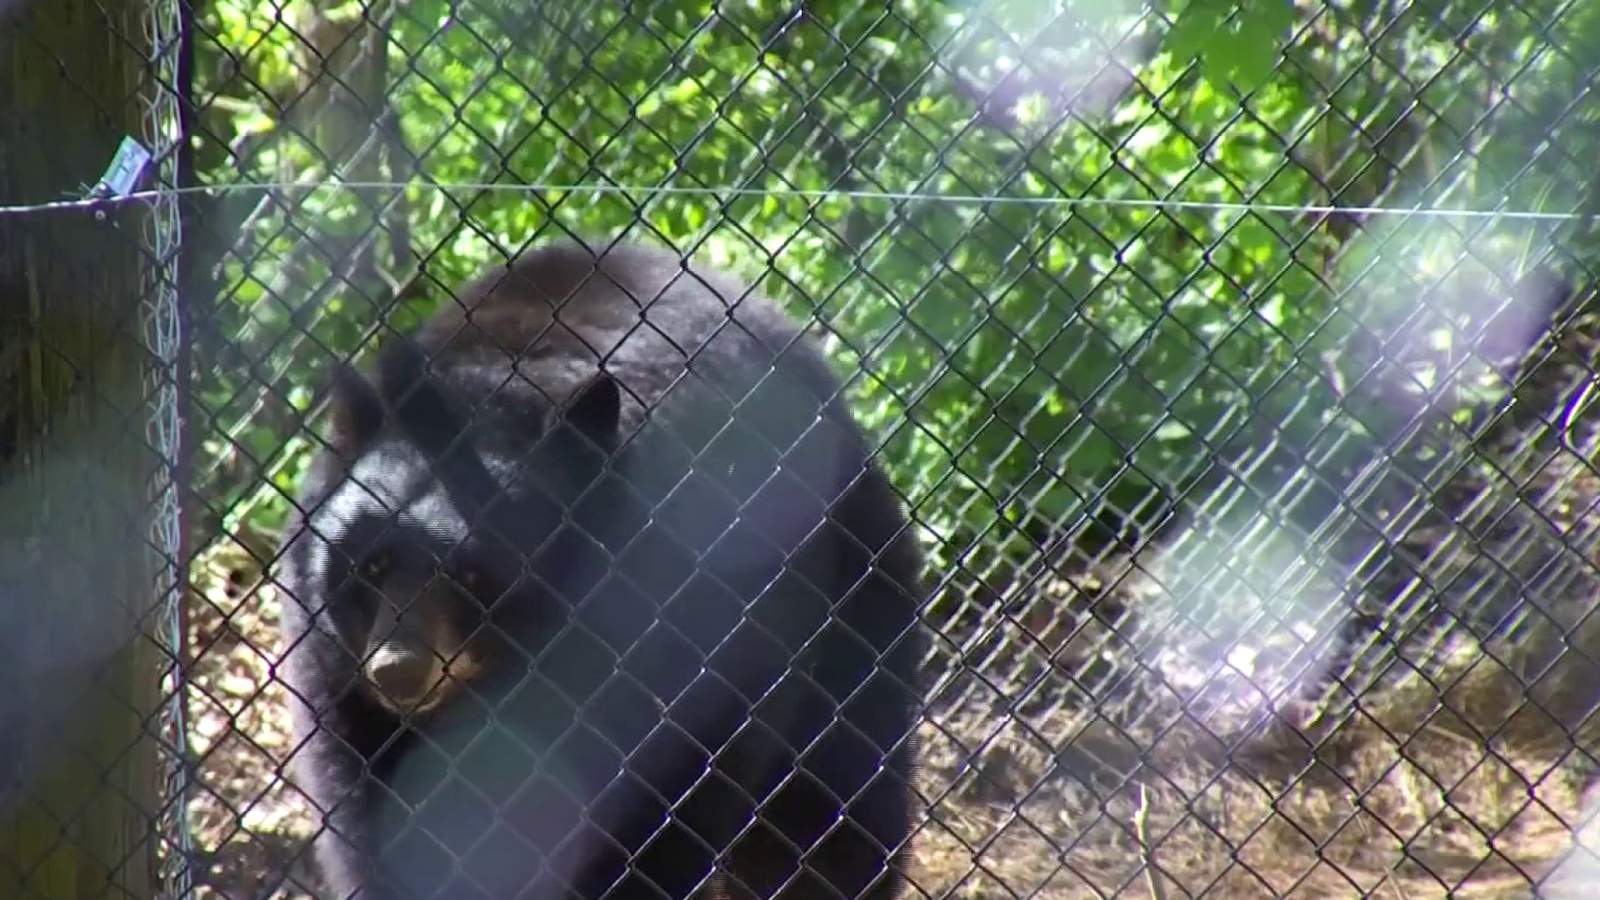 Mill Mountain Zoo welcomes new black bear